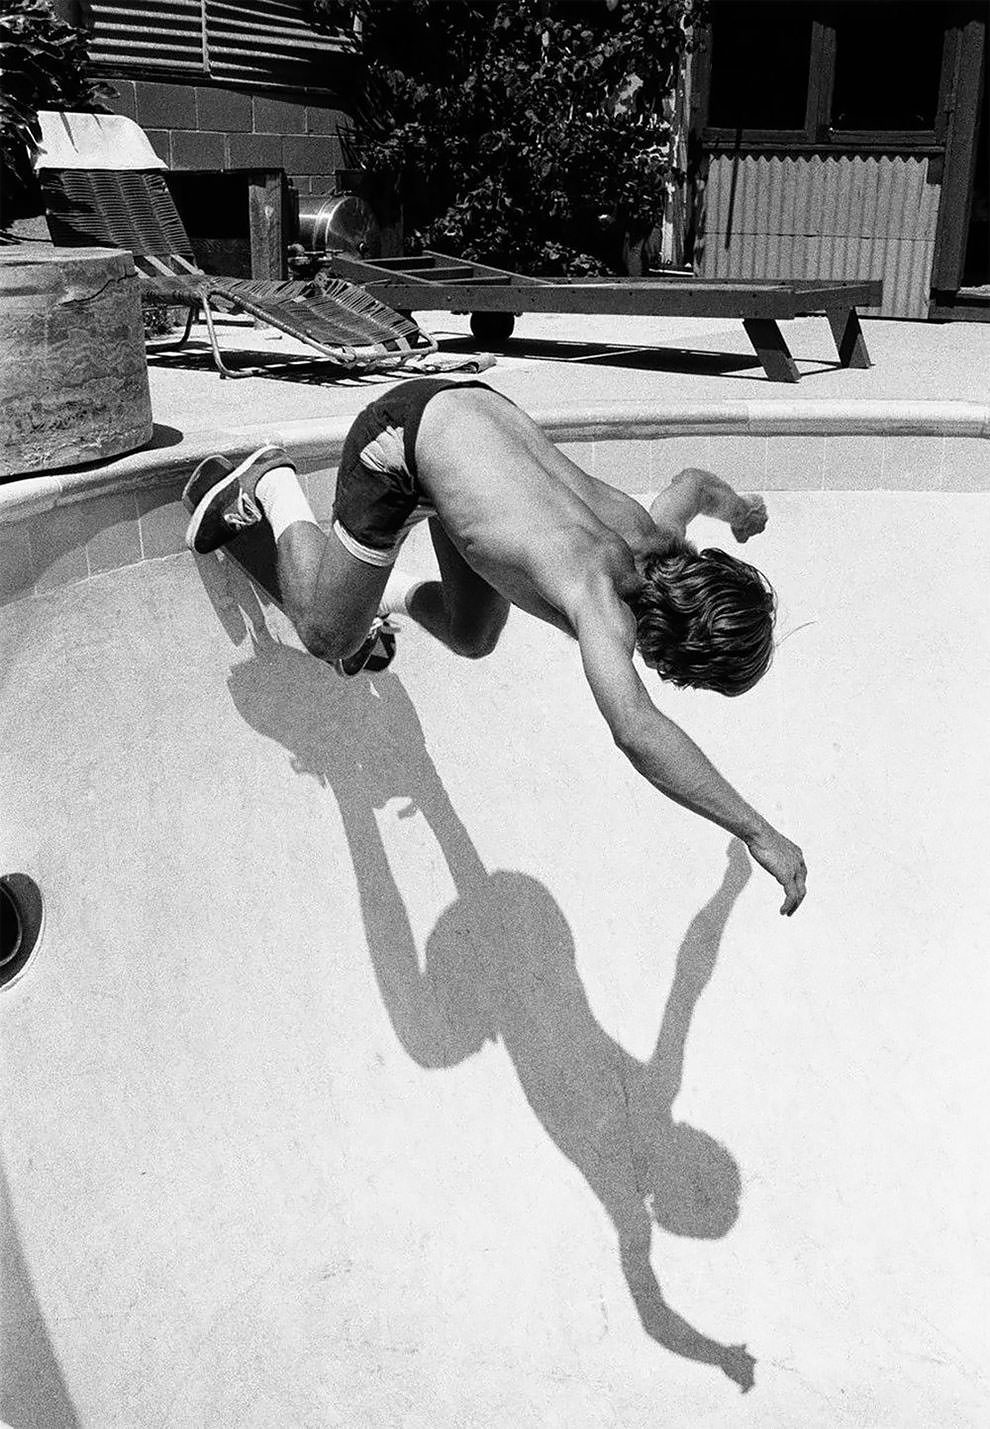 Skaters And Punkers: 50+ Stunning Photos Capturing Californian Youth From 1970s-80s